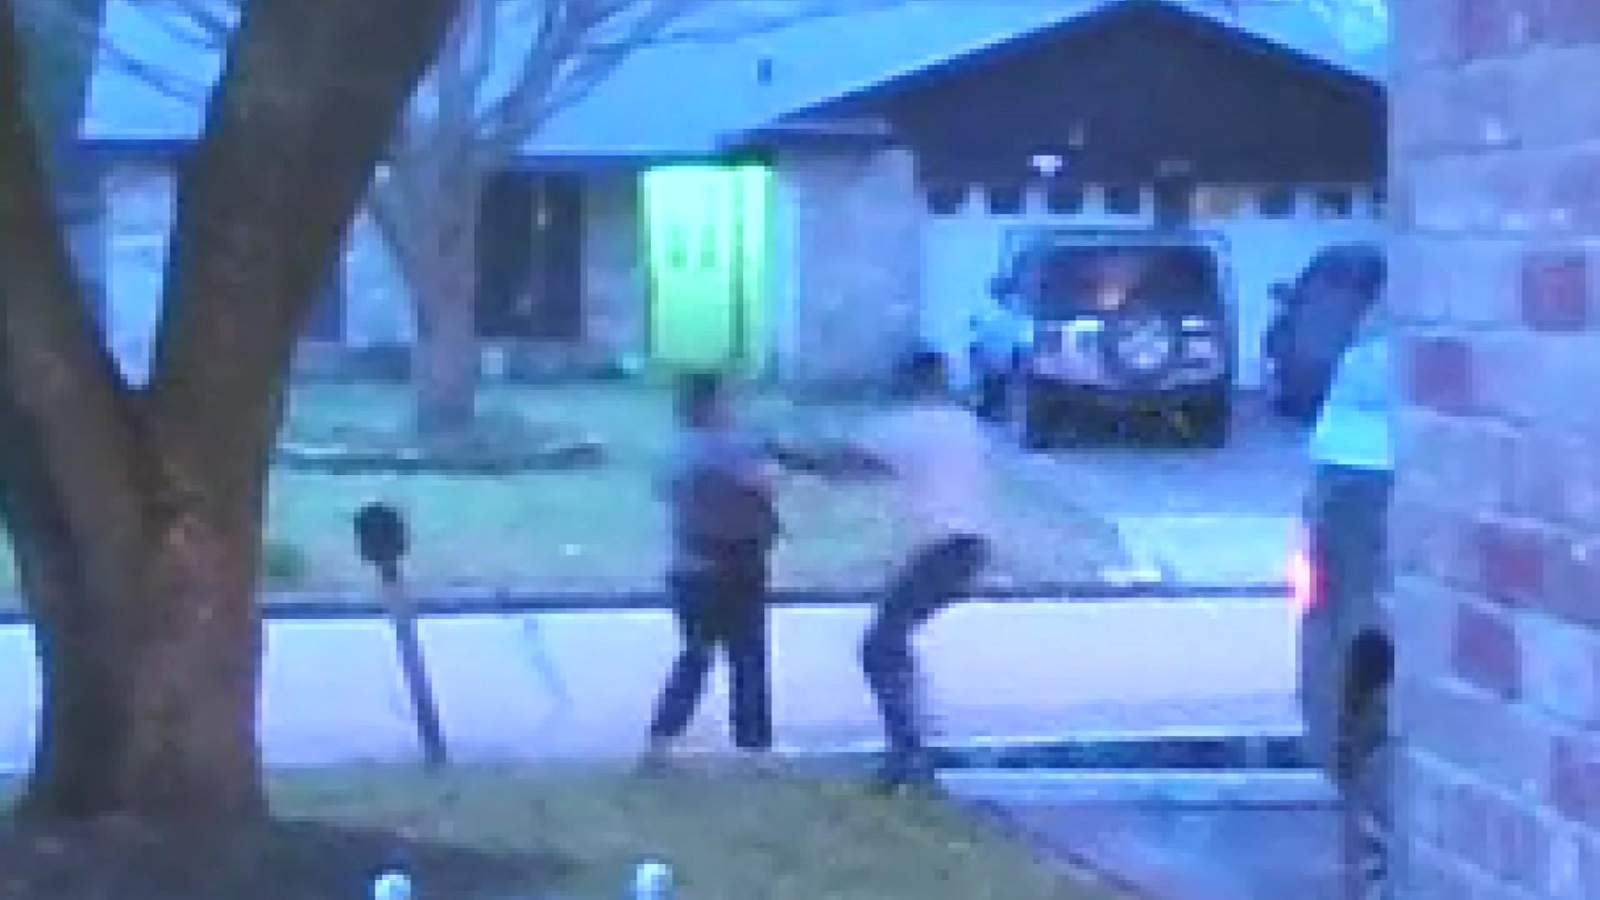 ‘I’m going to die in my front yard’: Video shows woman being robbed at gunpoint outside Friendswood home